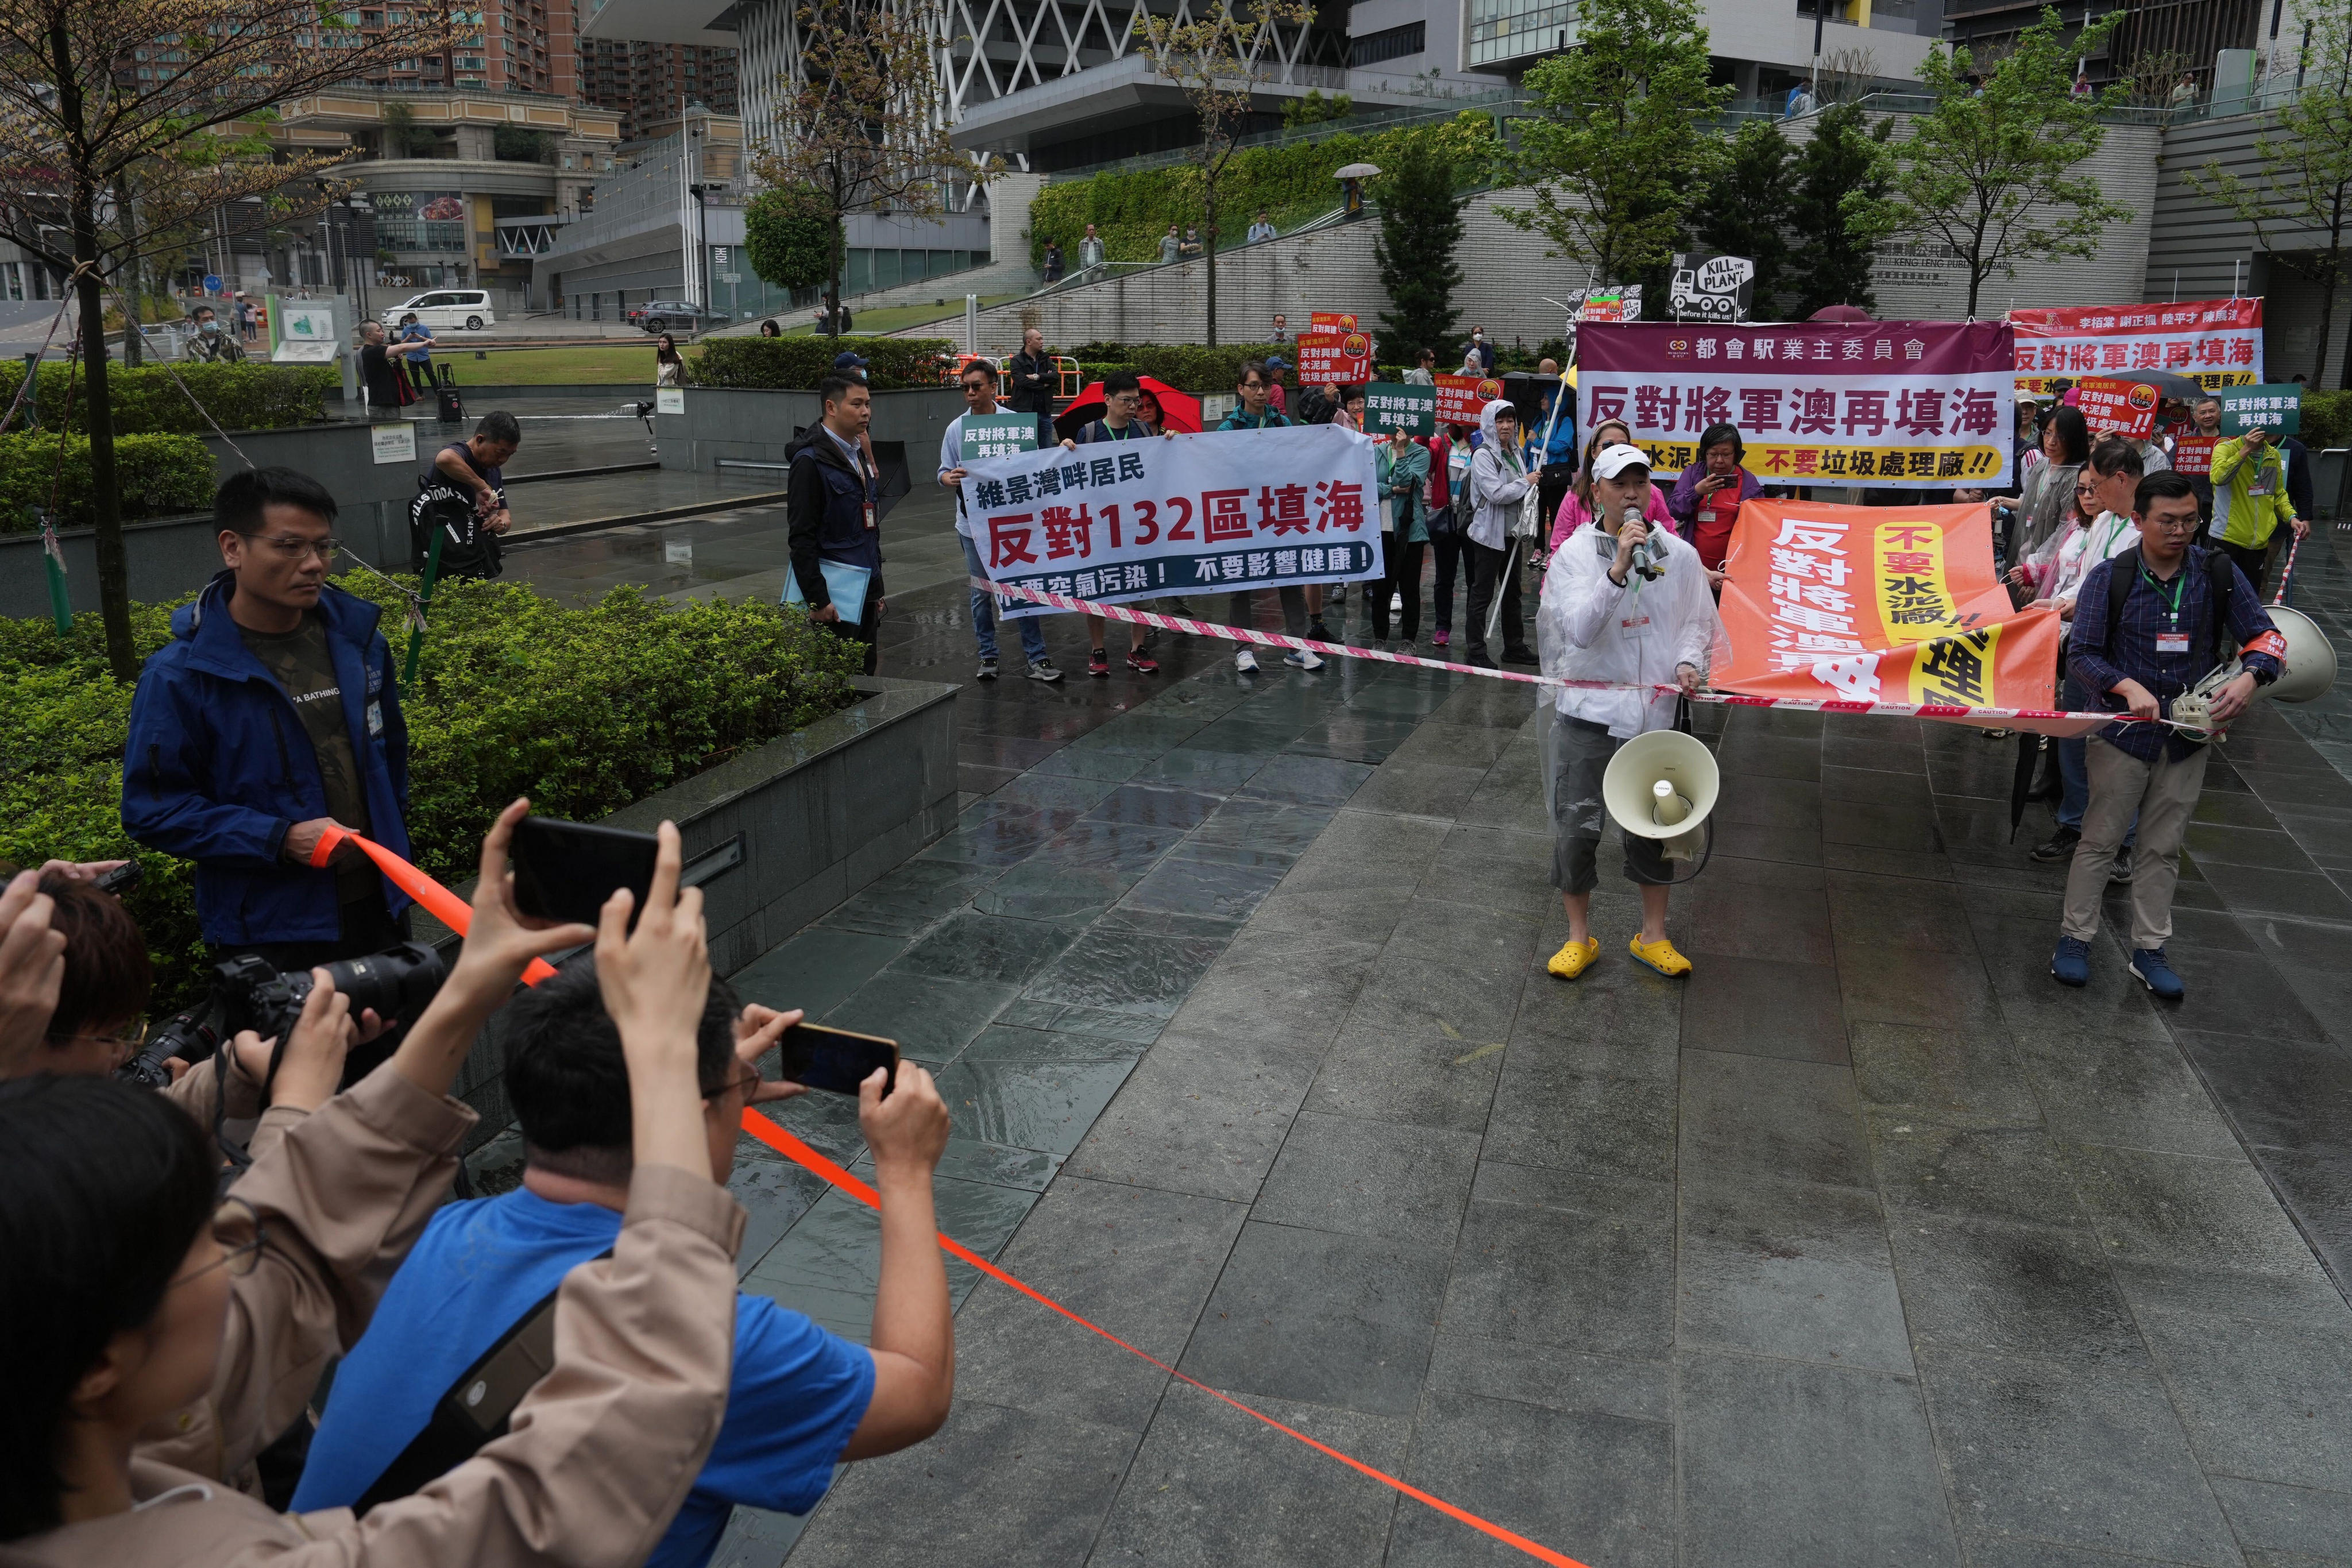 Rally against further land-reclamation projects off Tseung Kwan O and unpleasant facilities near their neighbourhood. The demonstration is the first authorised protest in three years. Photo: Elson Li